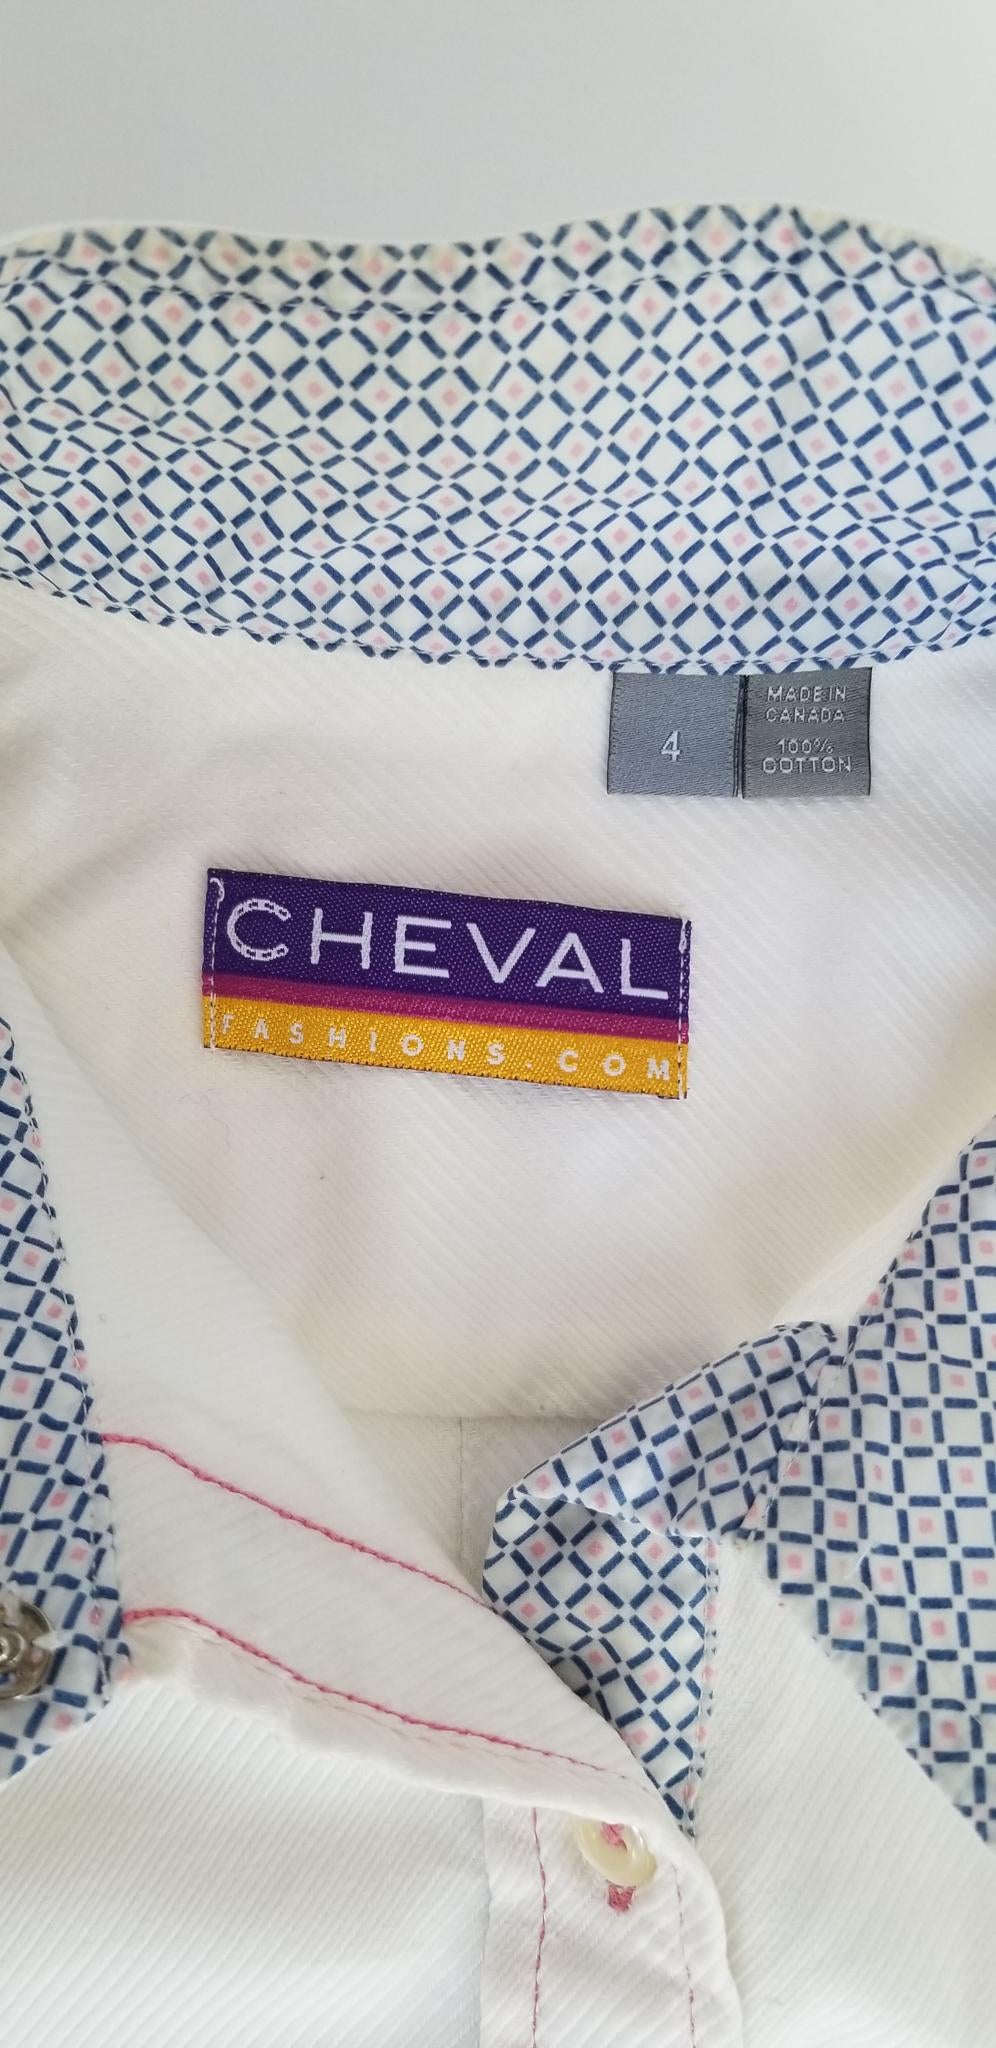 Cheval Fashions Competition Shirt - White (Pink/Blue Collar) - Women's 4